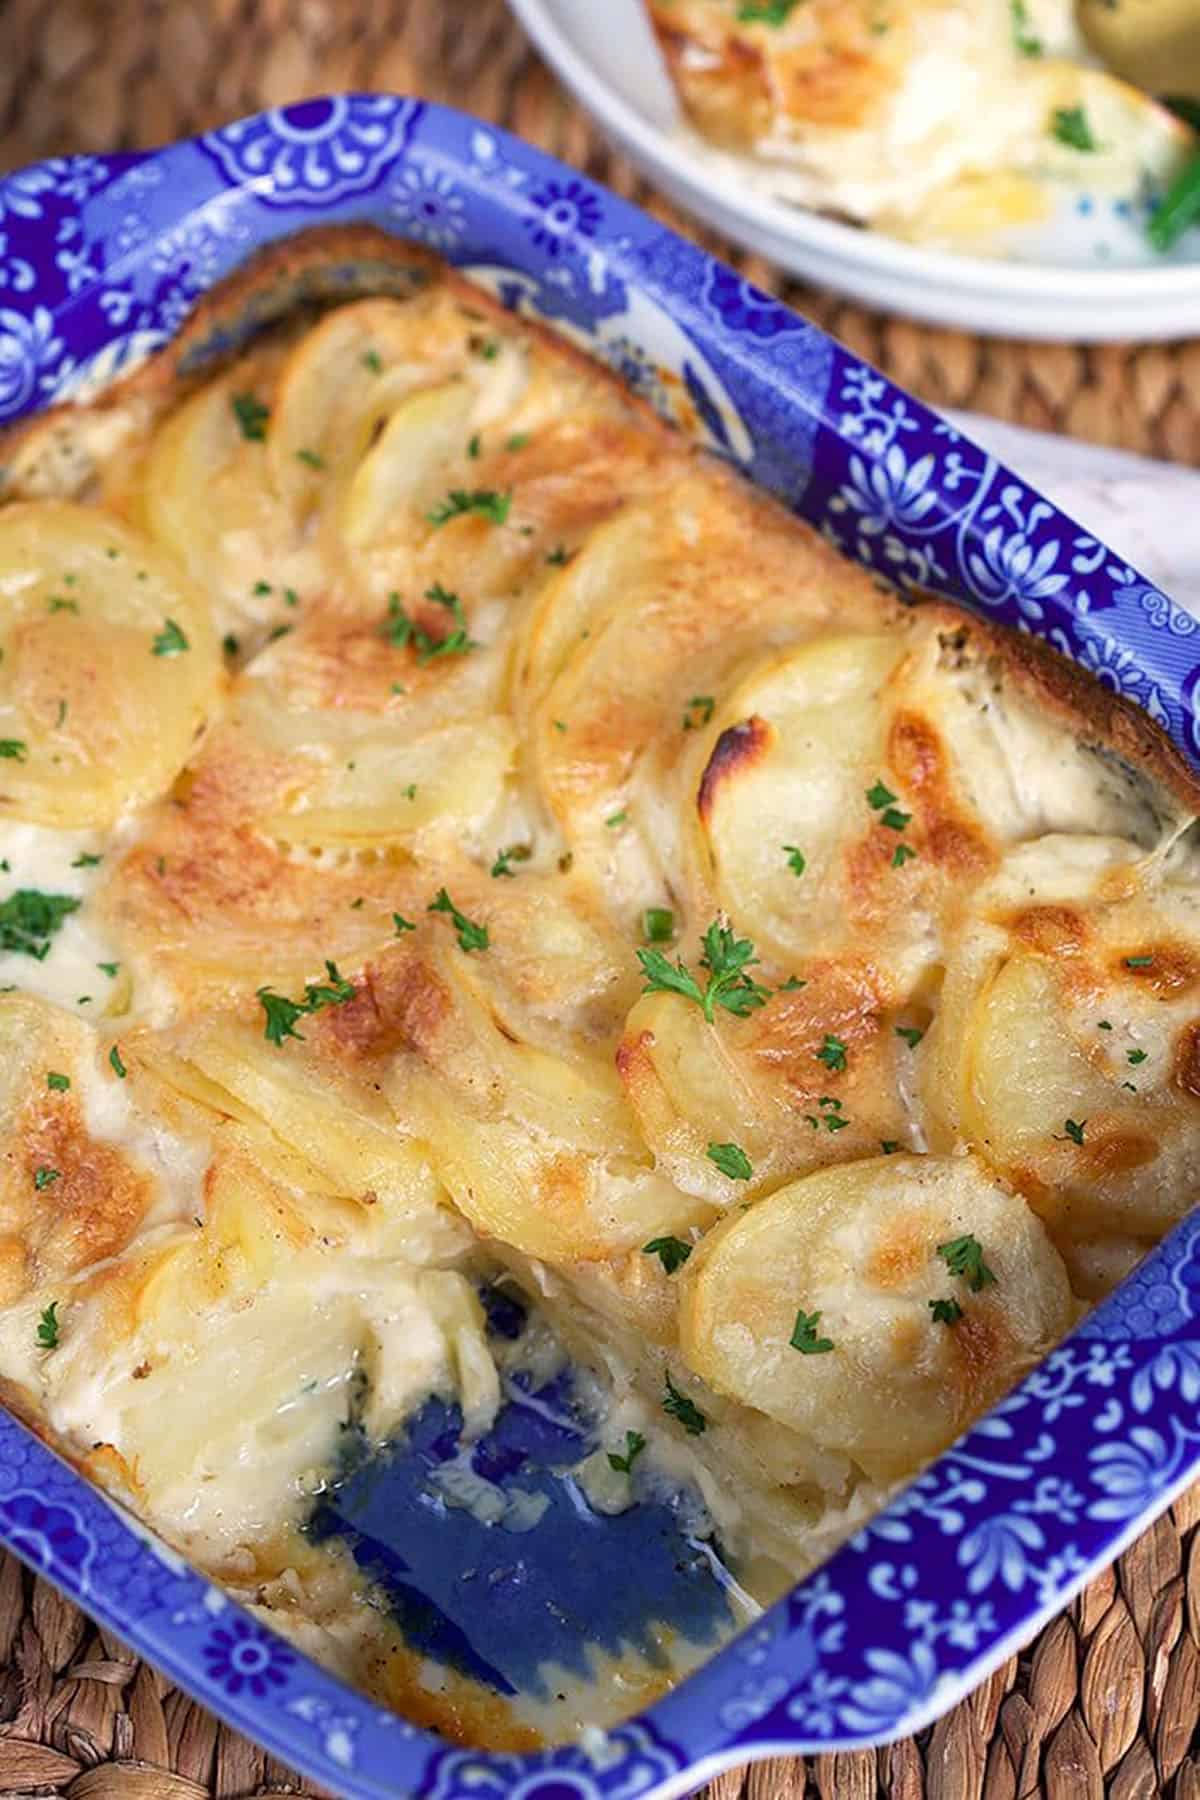 Homemade scalloped potatoes in a blue and white baking dish.